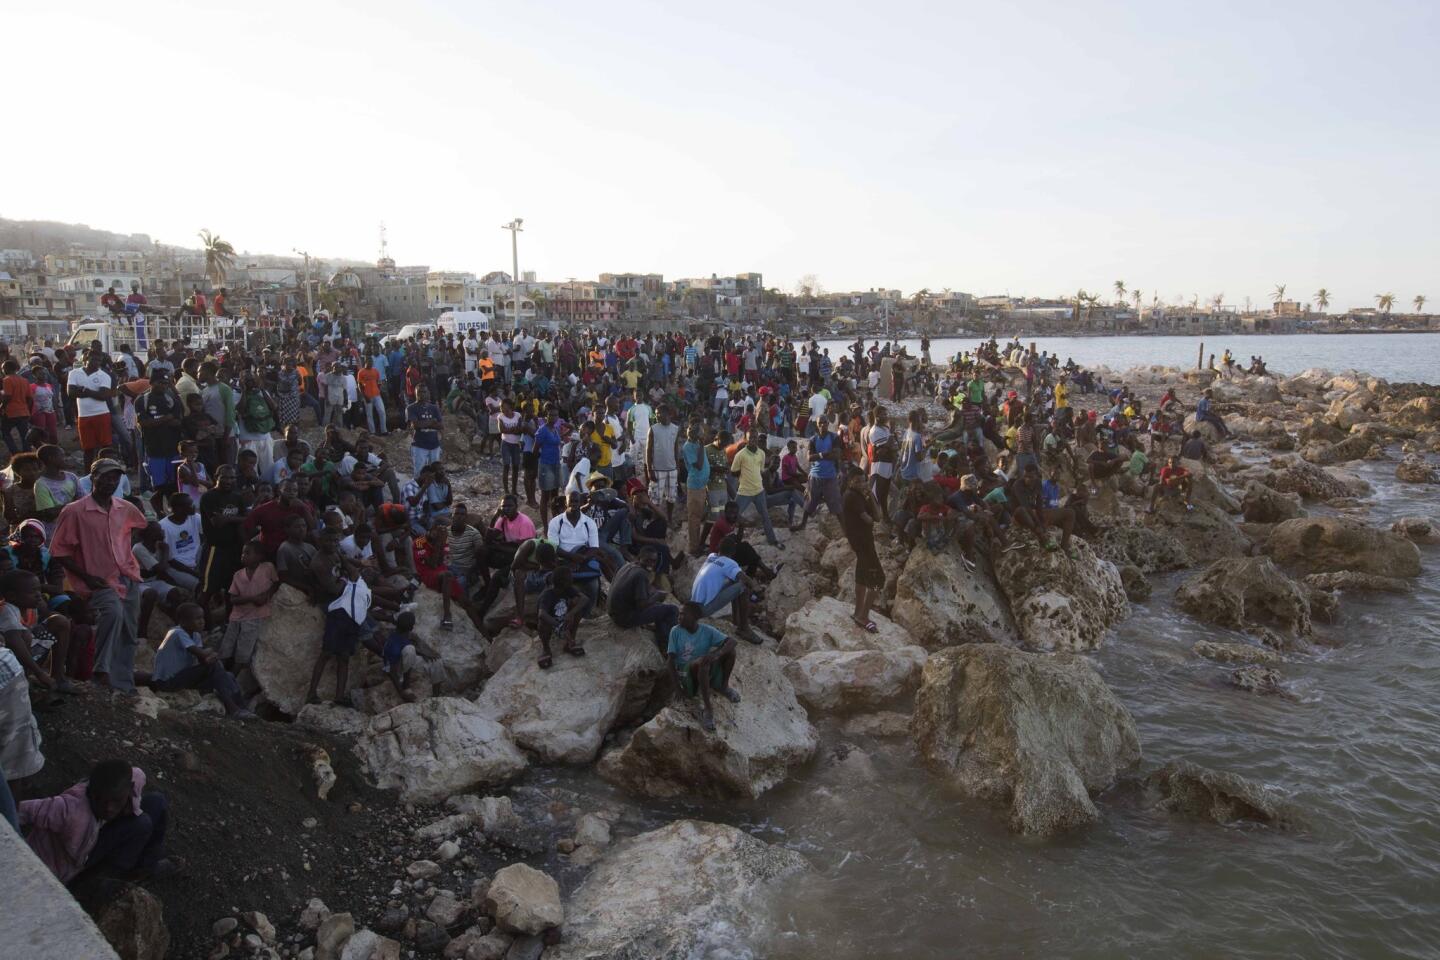 Residents wait on the shore as a boat with water and food from the "Mission of Hope" charity arrives after Hurricane Matthew swept through Jeremie, Haiti, on Oct. 8, 2016.